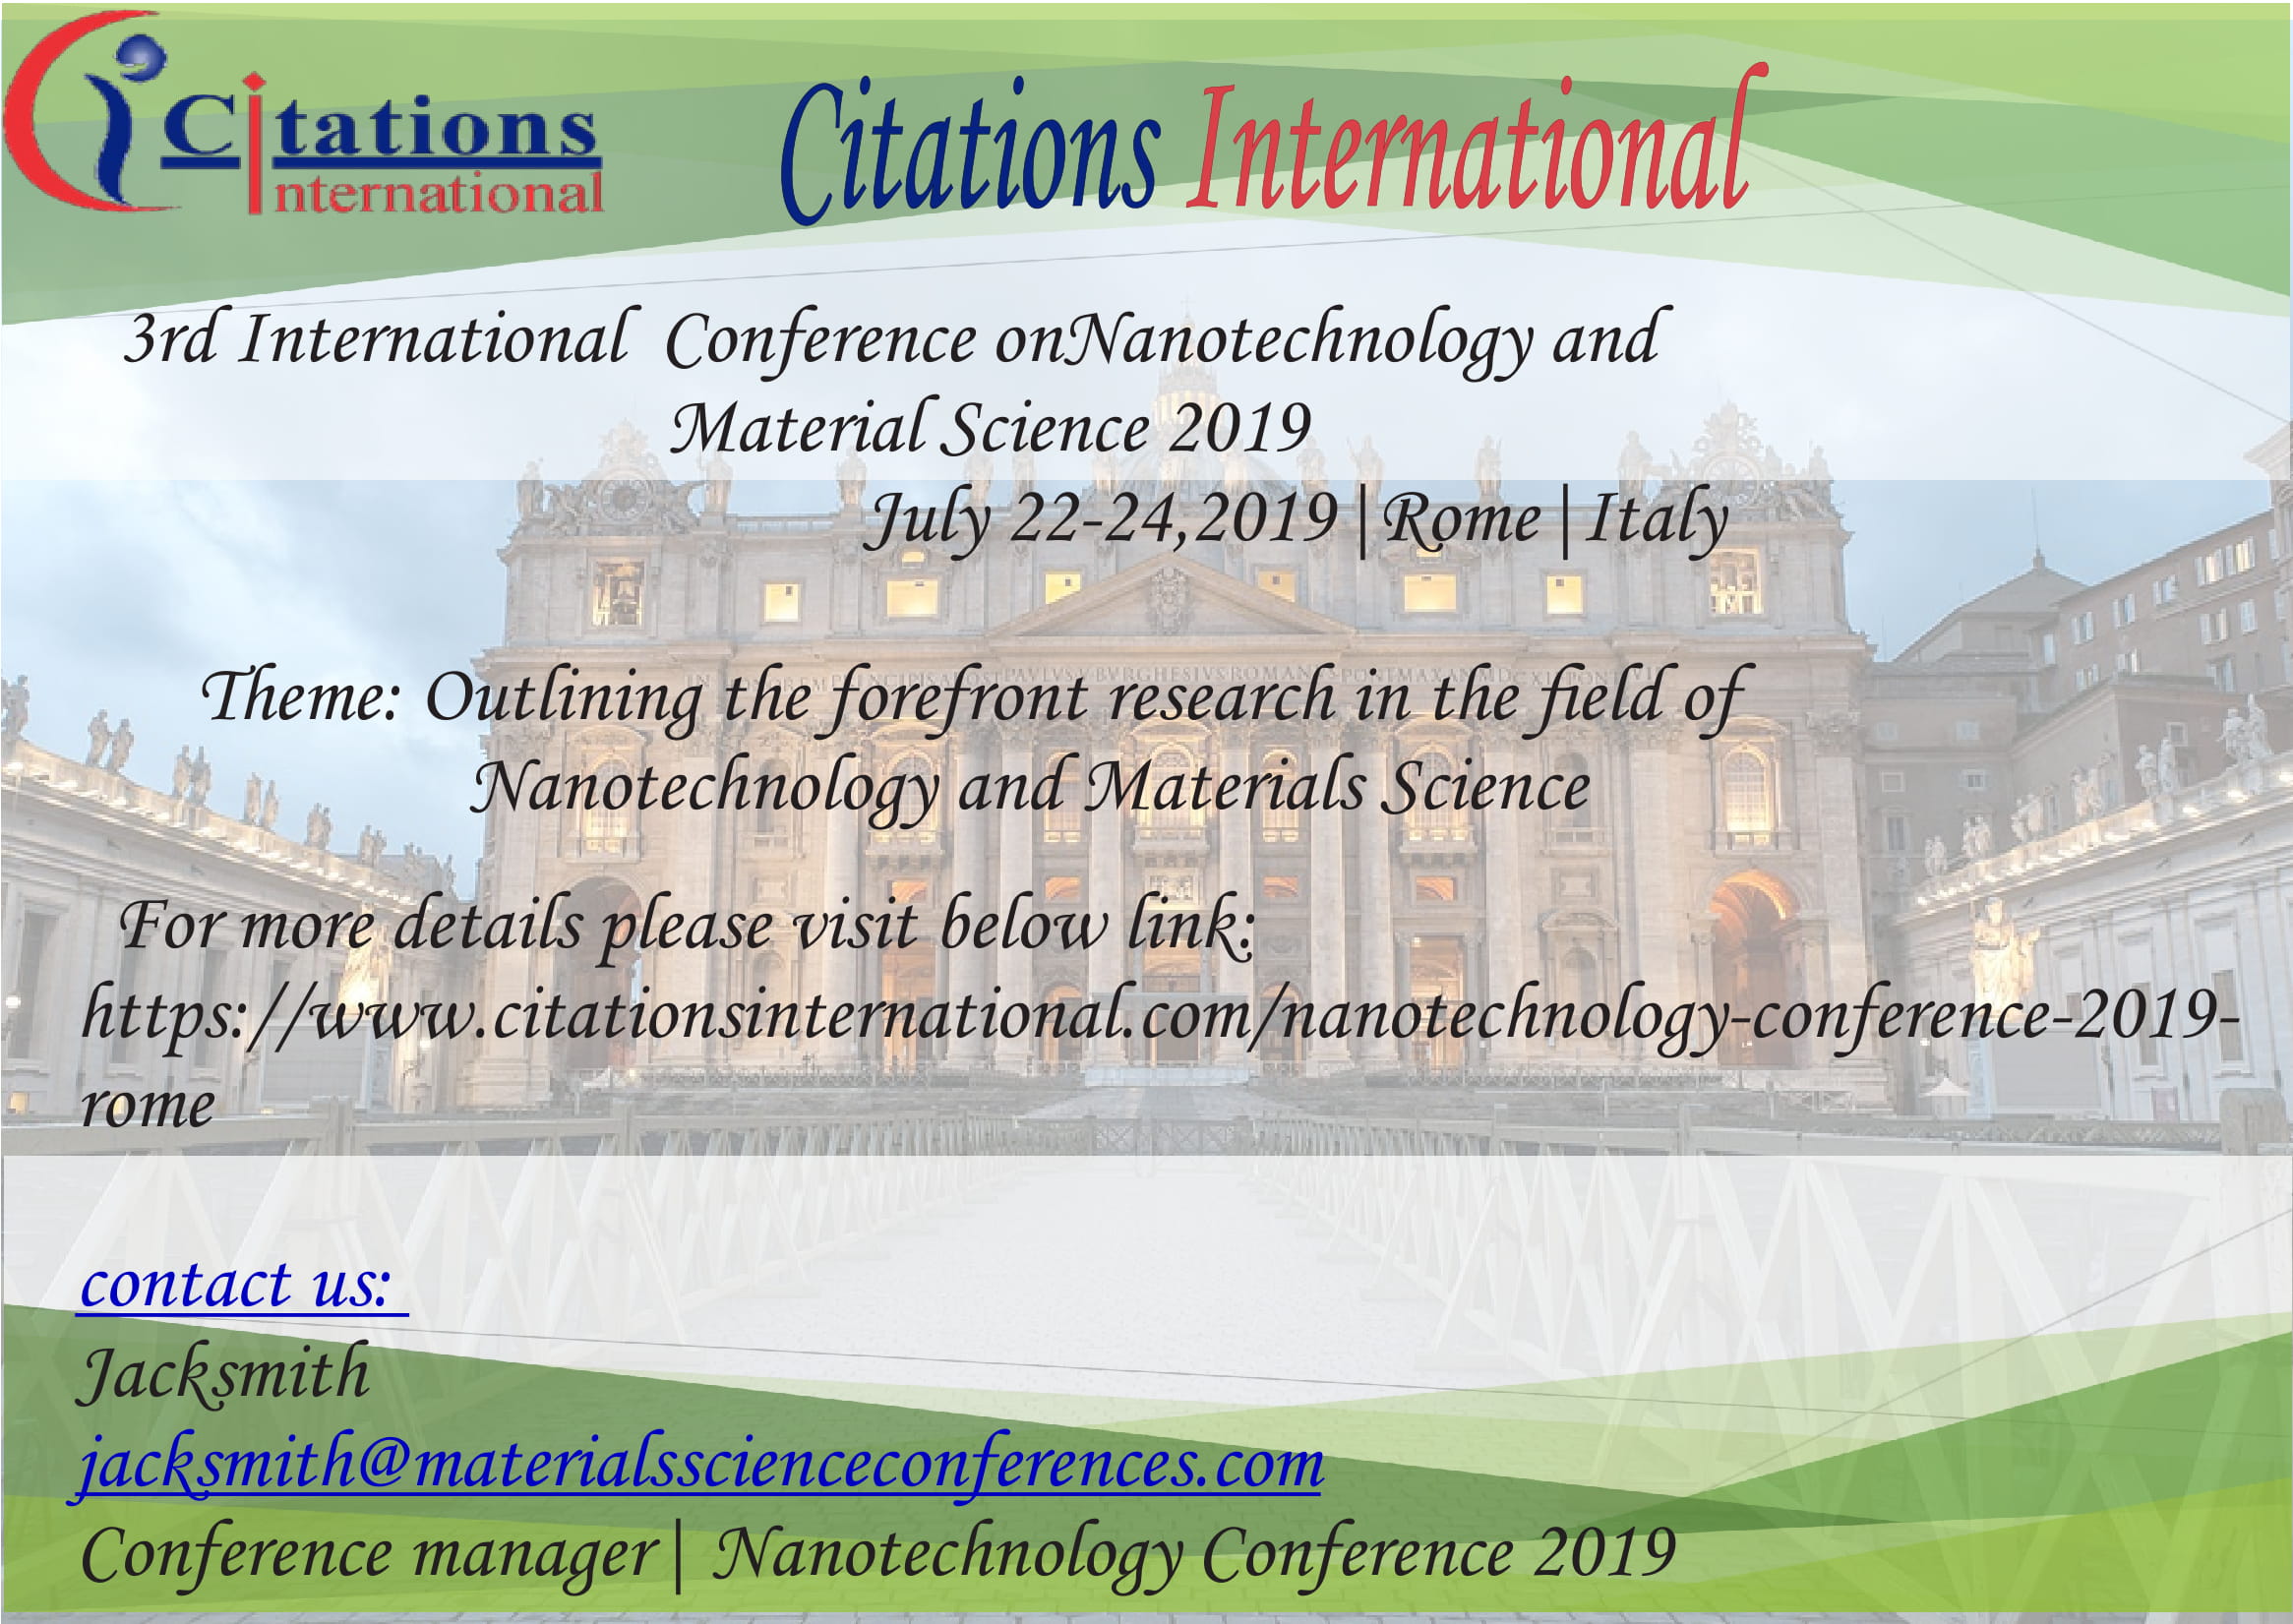 3rd International Conference on Nanotechnology and Materials Science, Rome, Lazio, Italy